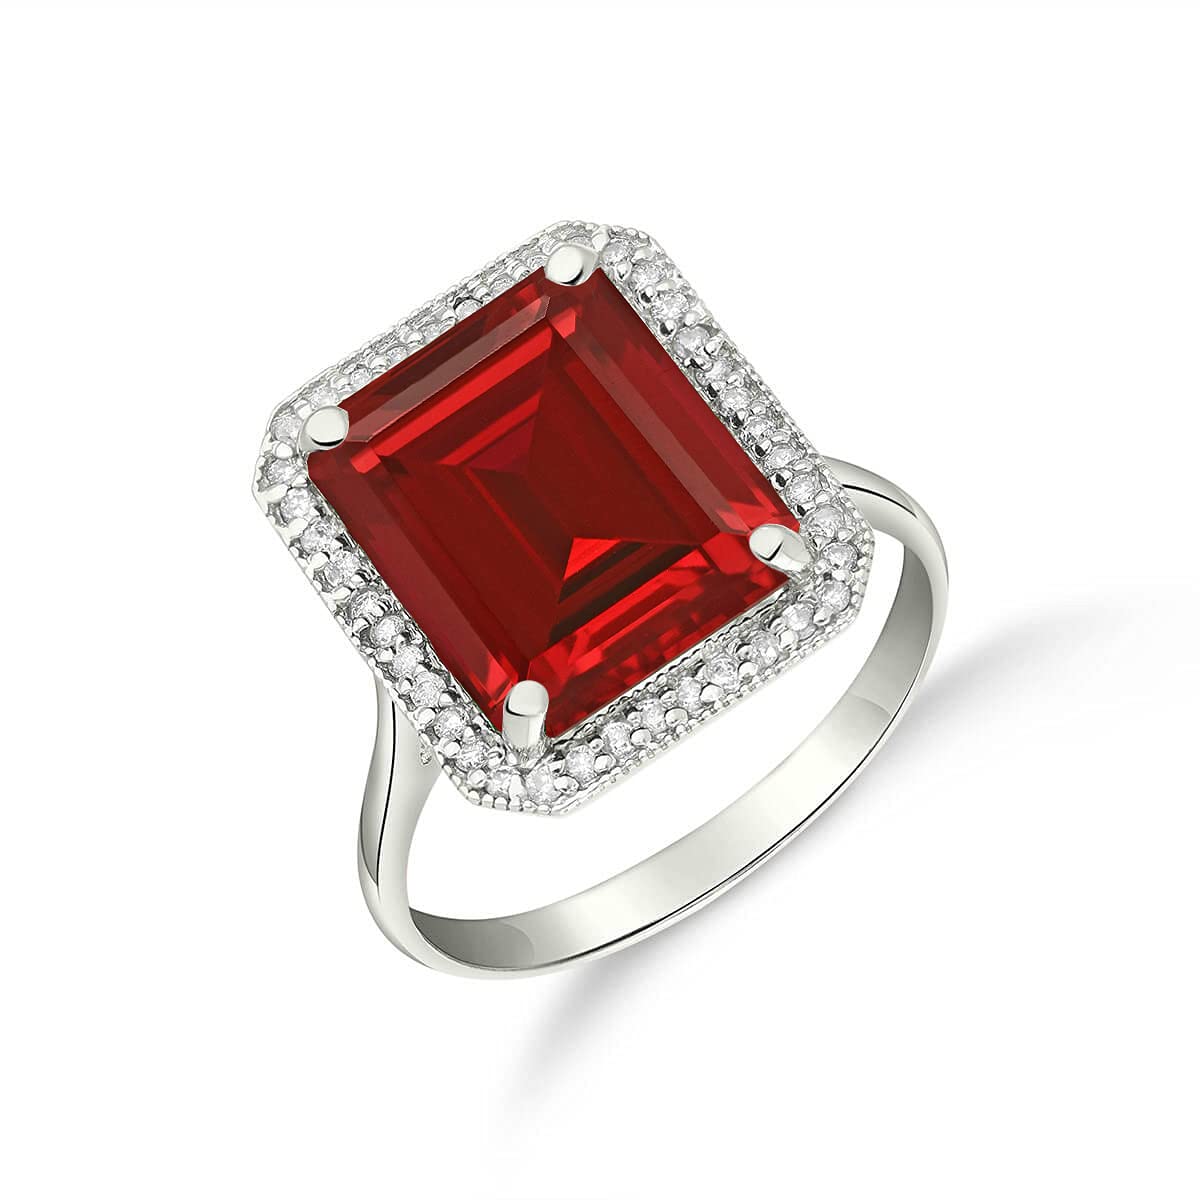 Galaxy Gold GG 7.45 ct 14k Solid Gold Emerald Cut Ruby Halo Diamond Ring 4894 (White-Gold, 8.5)